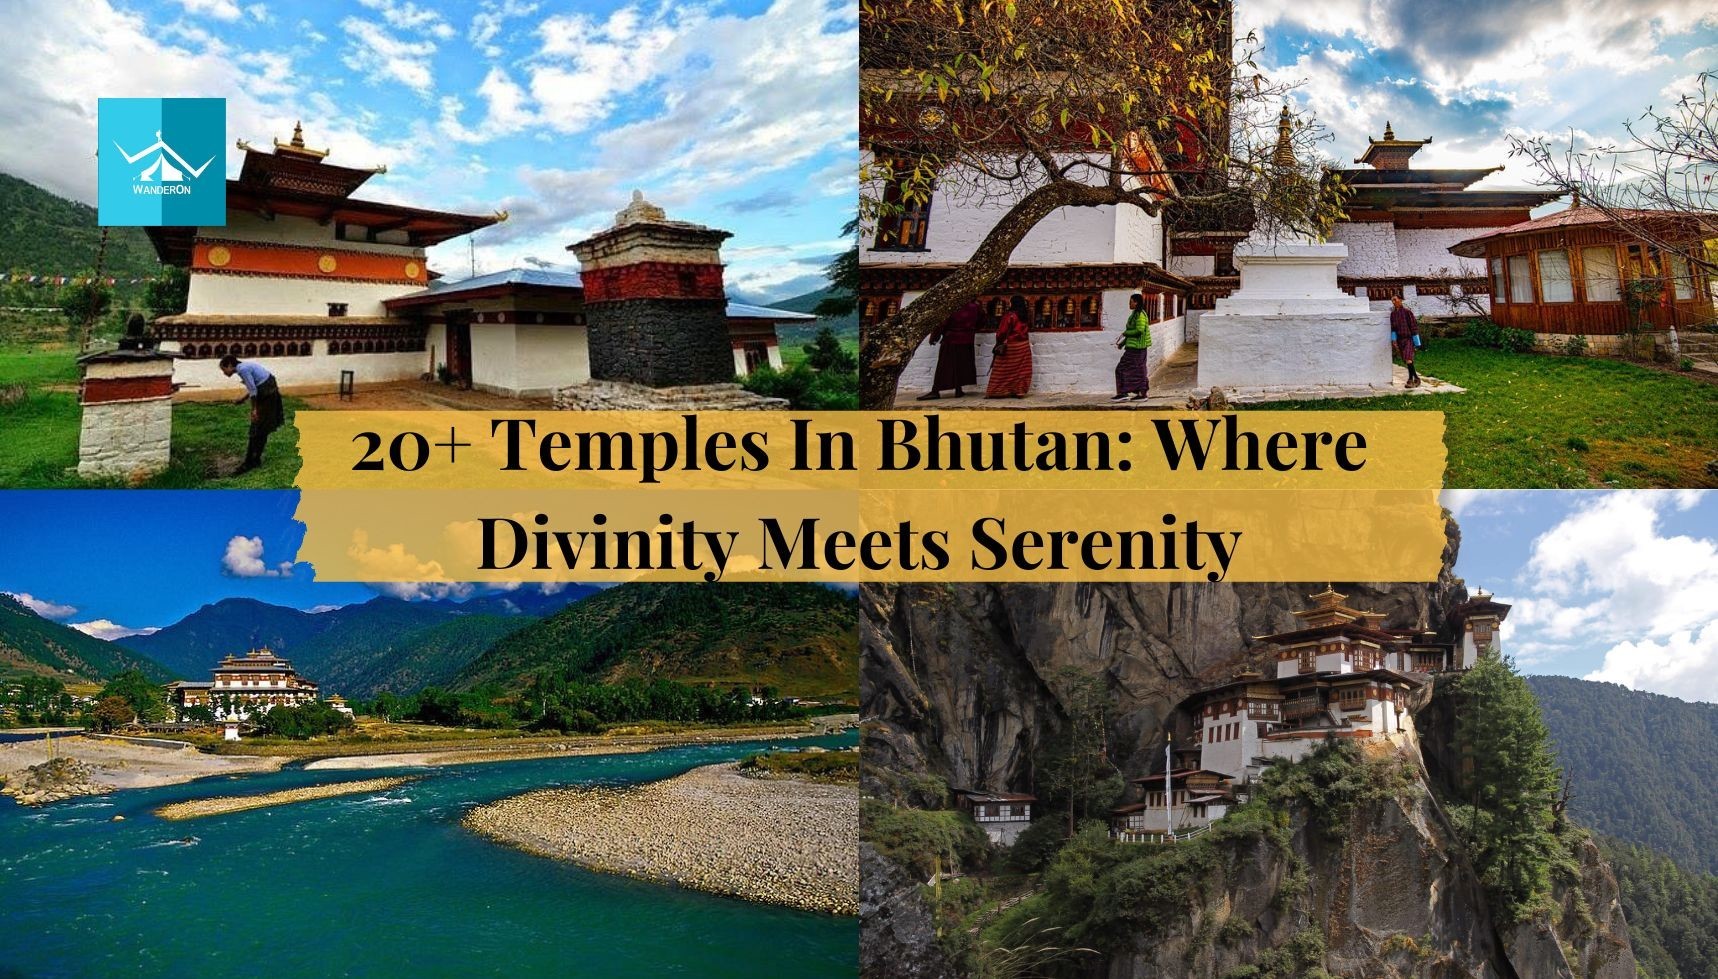 20+ Temples in Bhutan: Where Divinity Meets Serenity